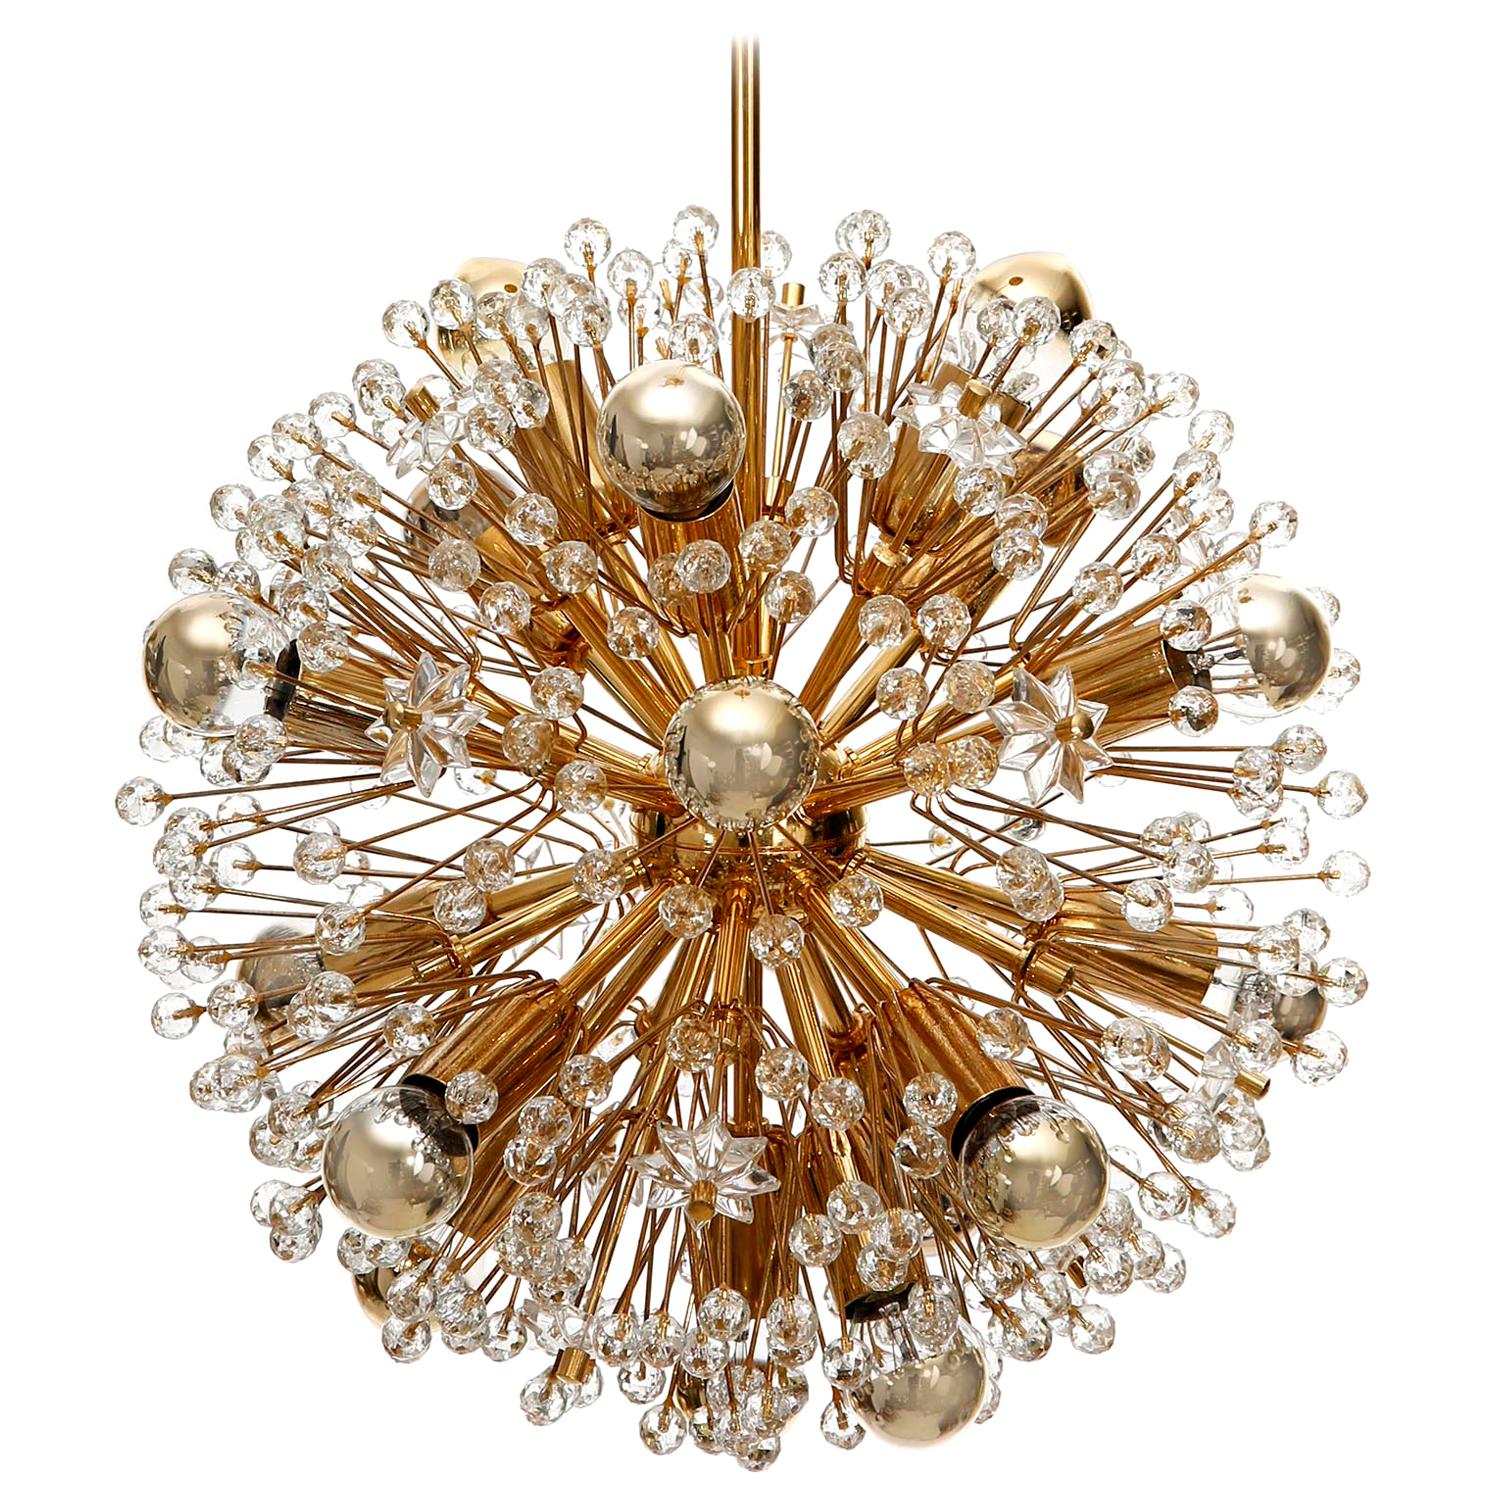 One of three Sputnik chandeliers designed by Emil Stejnar and manufactured in midcentury, circa 1970.
This beautiful light fixture is made of a 24-carat gold-plated brass frame which is decorated with cut glass in the form of beads and stars. This